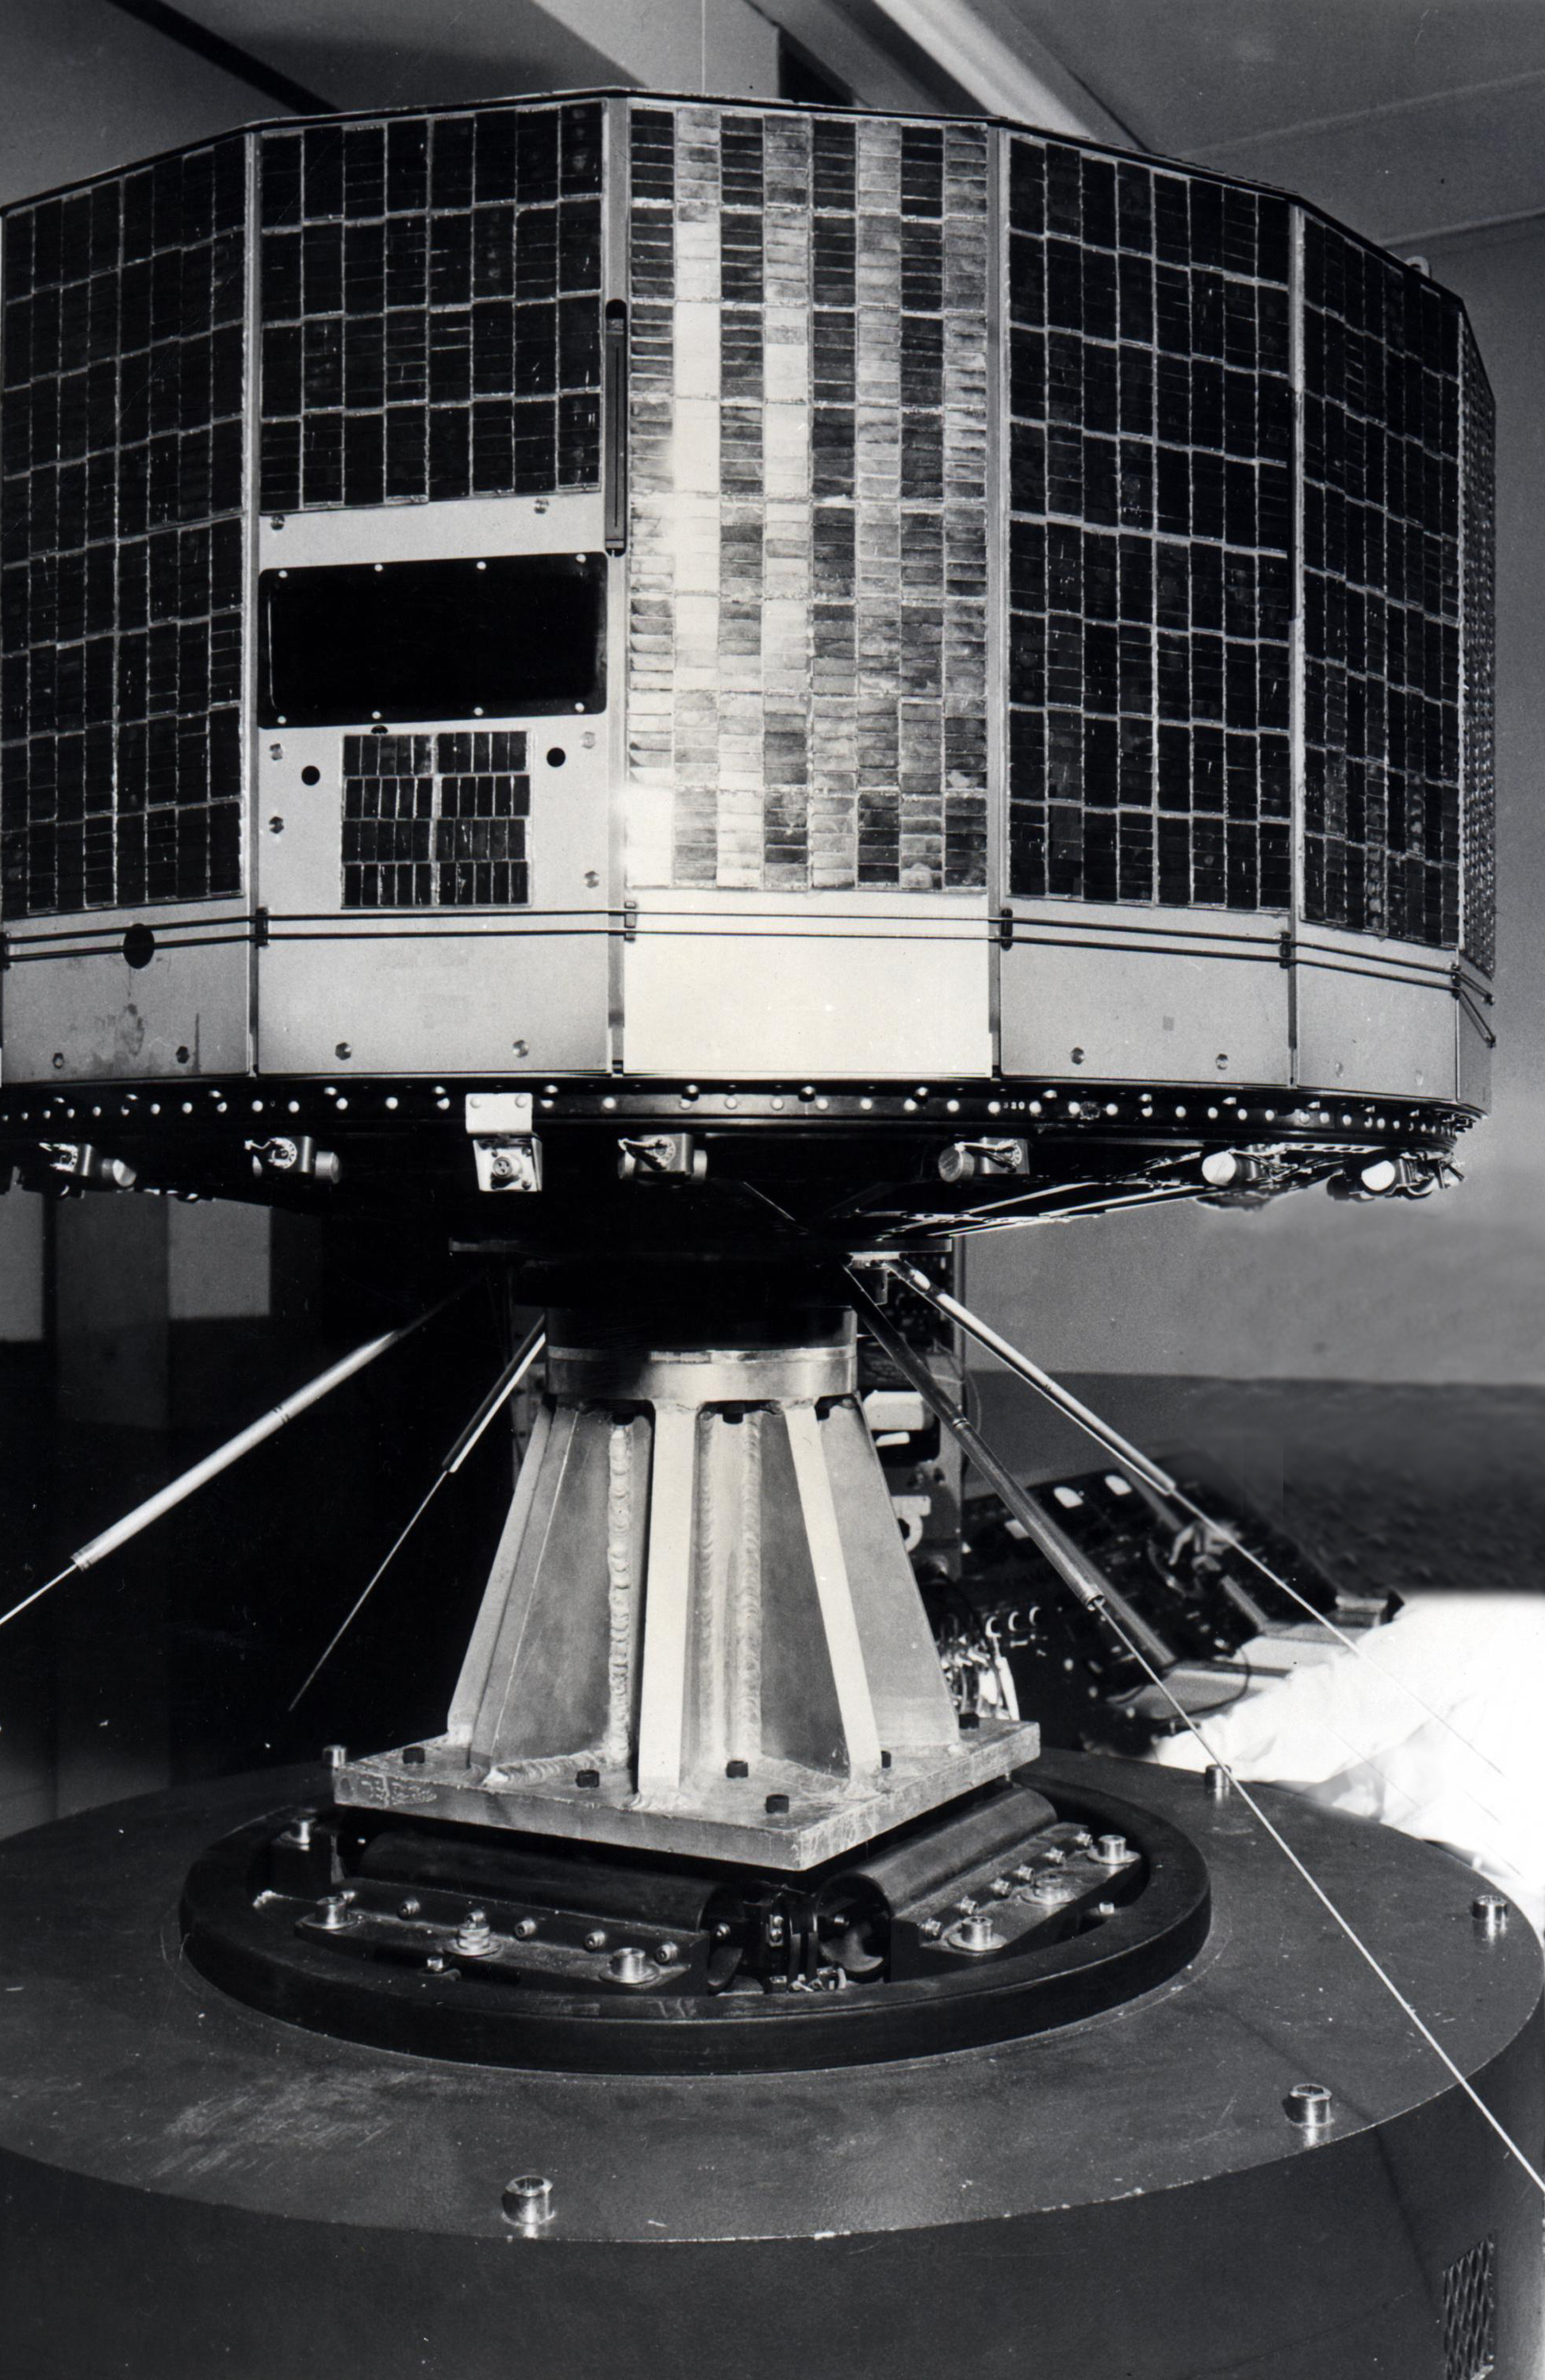 "TIROS-I, the world’s first successful weather satellite, was launched by NASA on April 1, 1960, marking one of the earliest efforts to see Earth’s weather from space. Equipped with two miniature television cameras, and circling Earth every 99 minutes, TIROS-1 gave weather forecasters their first-ever view of cloud formations developing around the globe.

Linked to an extensive network of ground stations, TIROS-1 orbited 450 miles above Earth for 78 days, sending back nearly 20,000 useful pictures